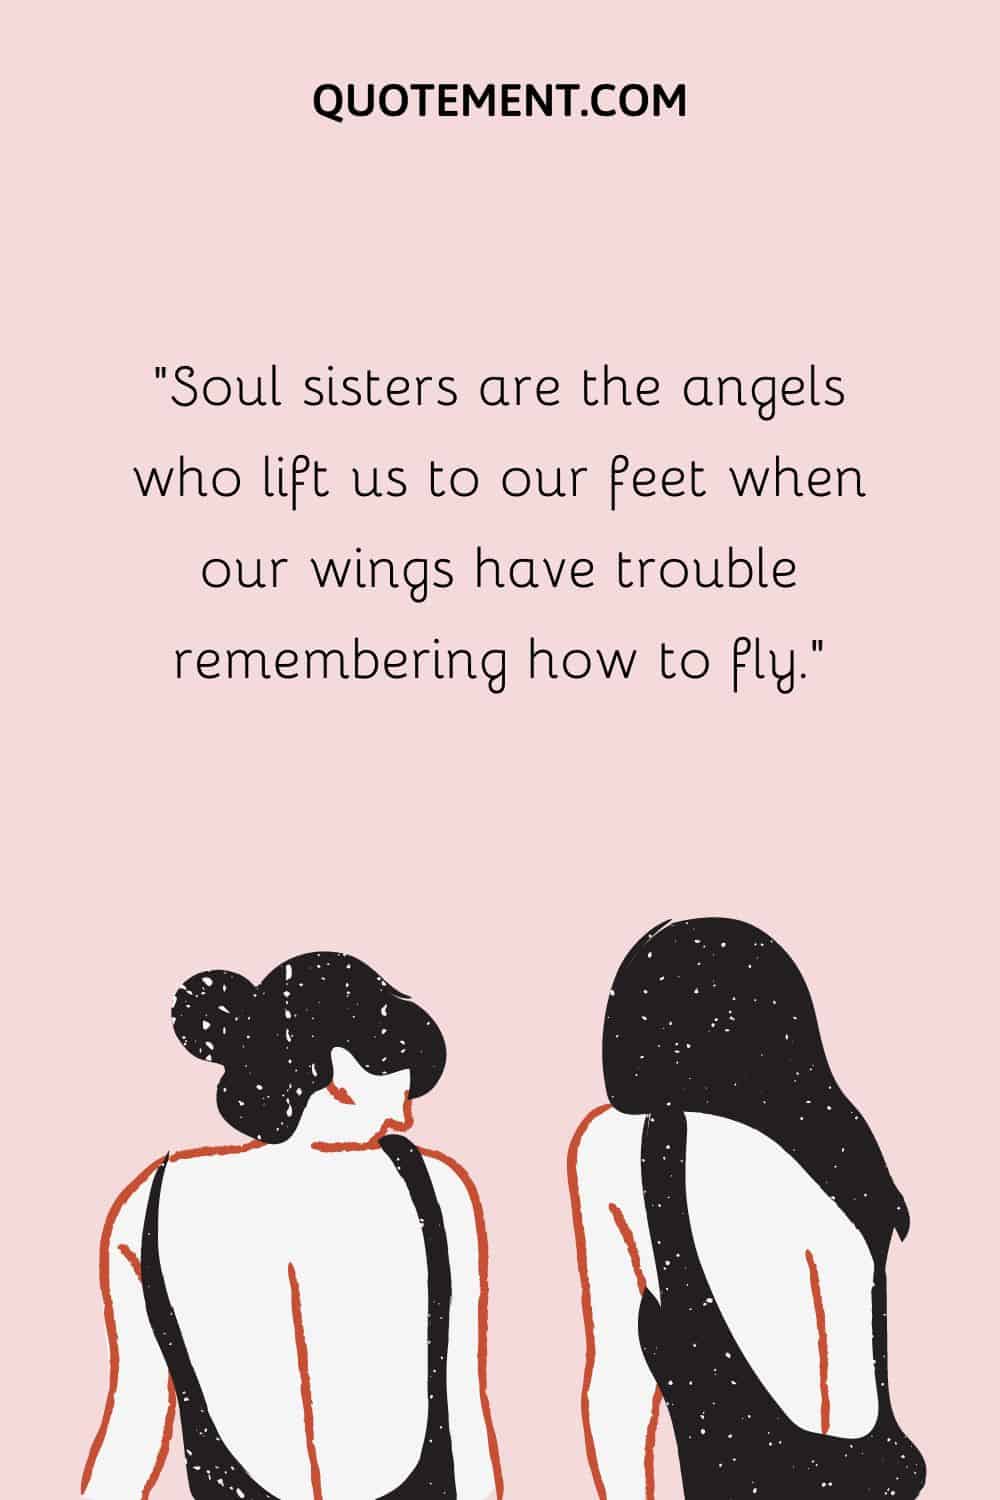 Soul sisters are the angels who lift us to our feet when our wings have trouble remembering how to fly